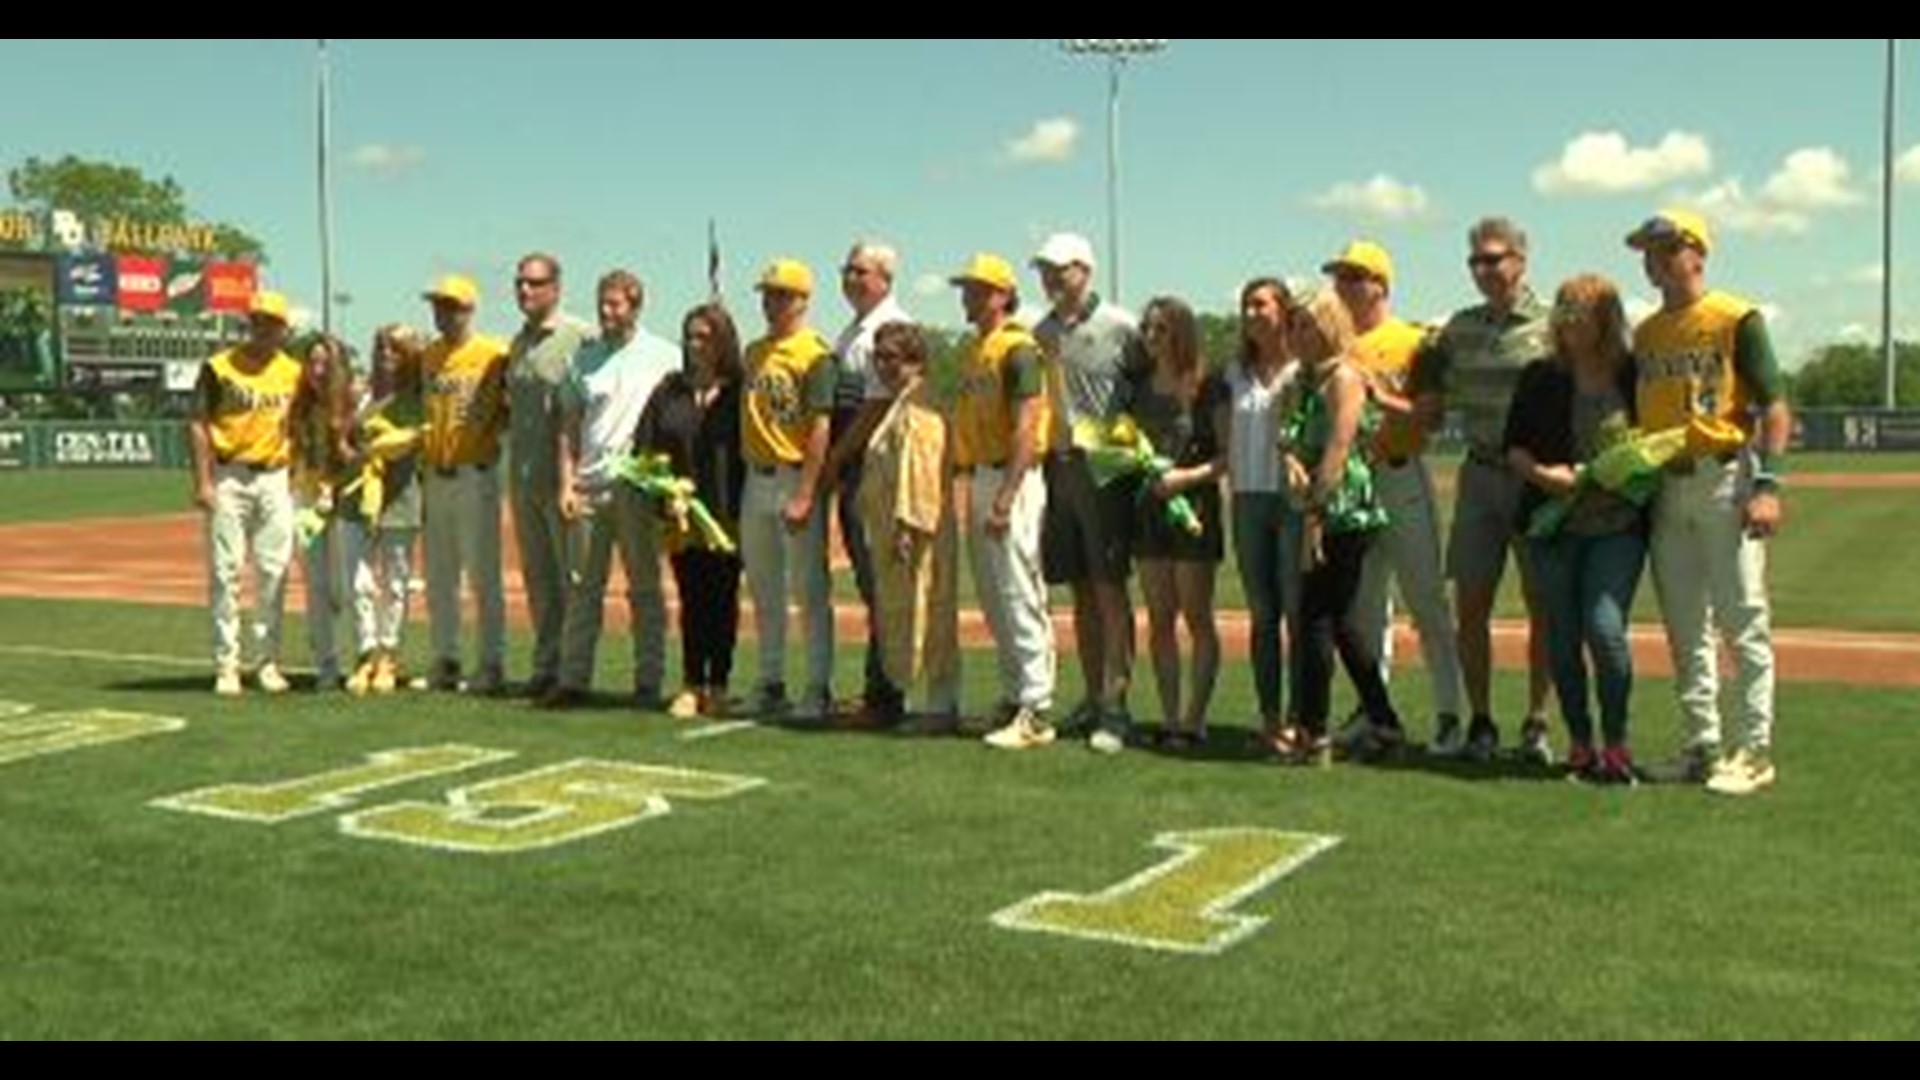 The moms and dads of Baylor Baseball have a friendly rivalry in the stands: Mama Mainland vs. Man Island.